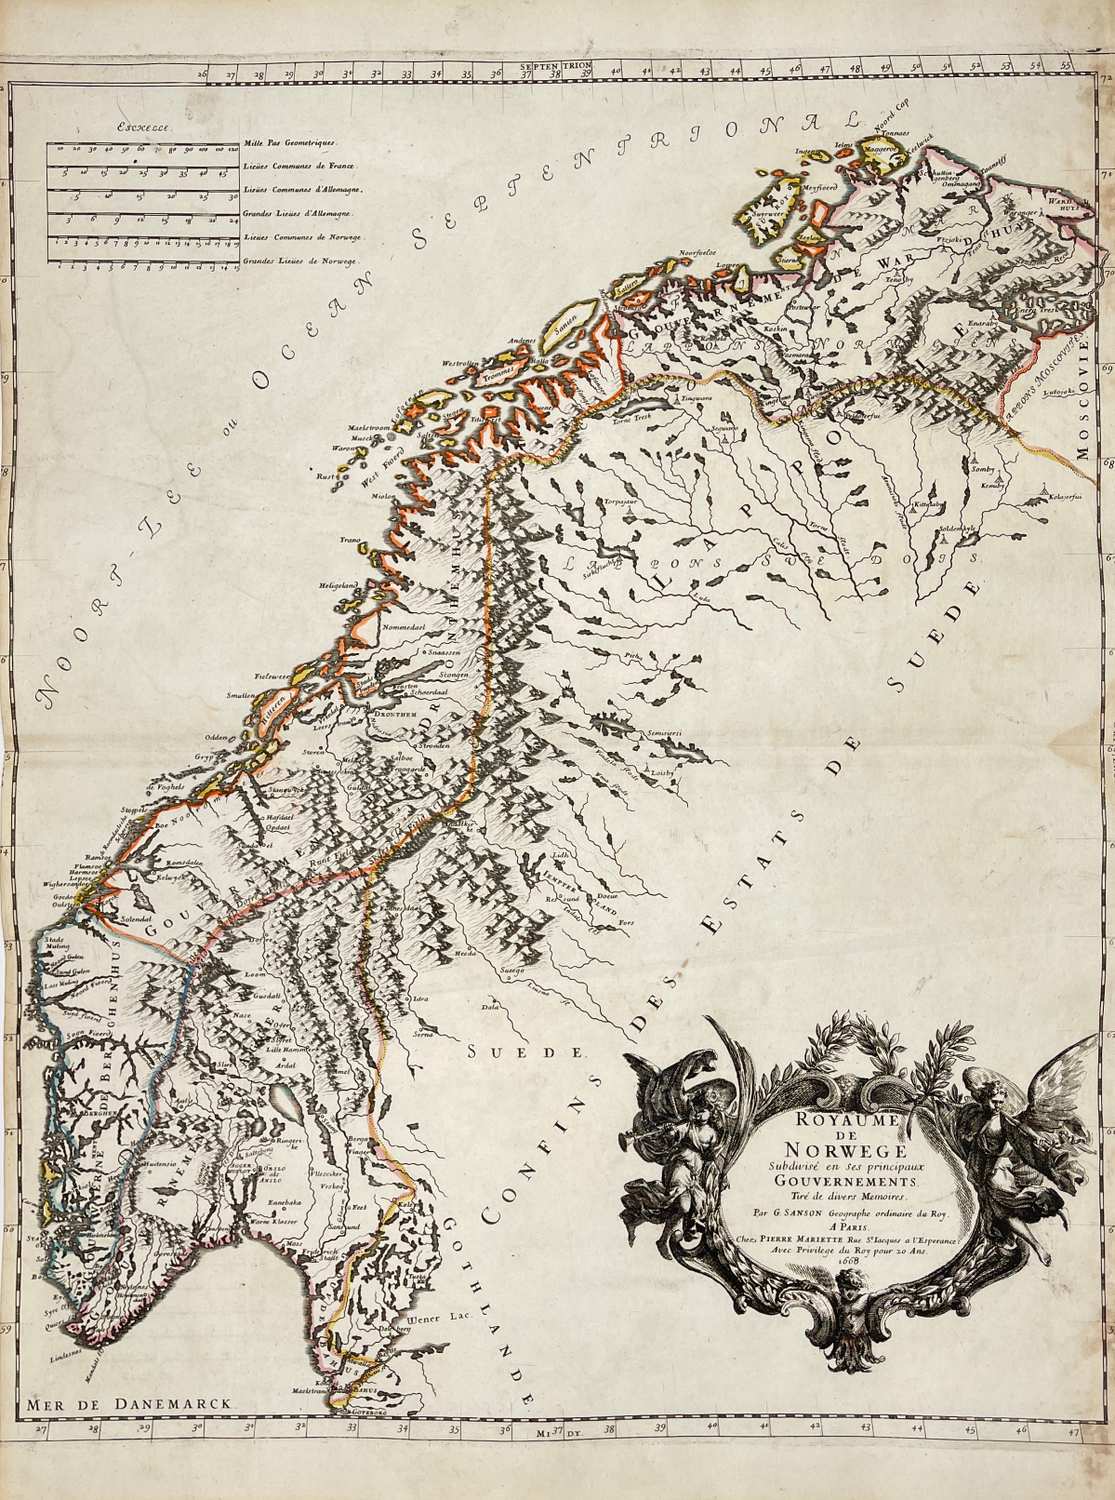 Antique Map of Norway 1668 - Guillaume Sanson - The first printed map - Dahlströms Fine Art